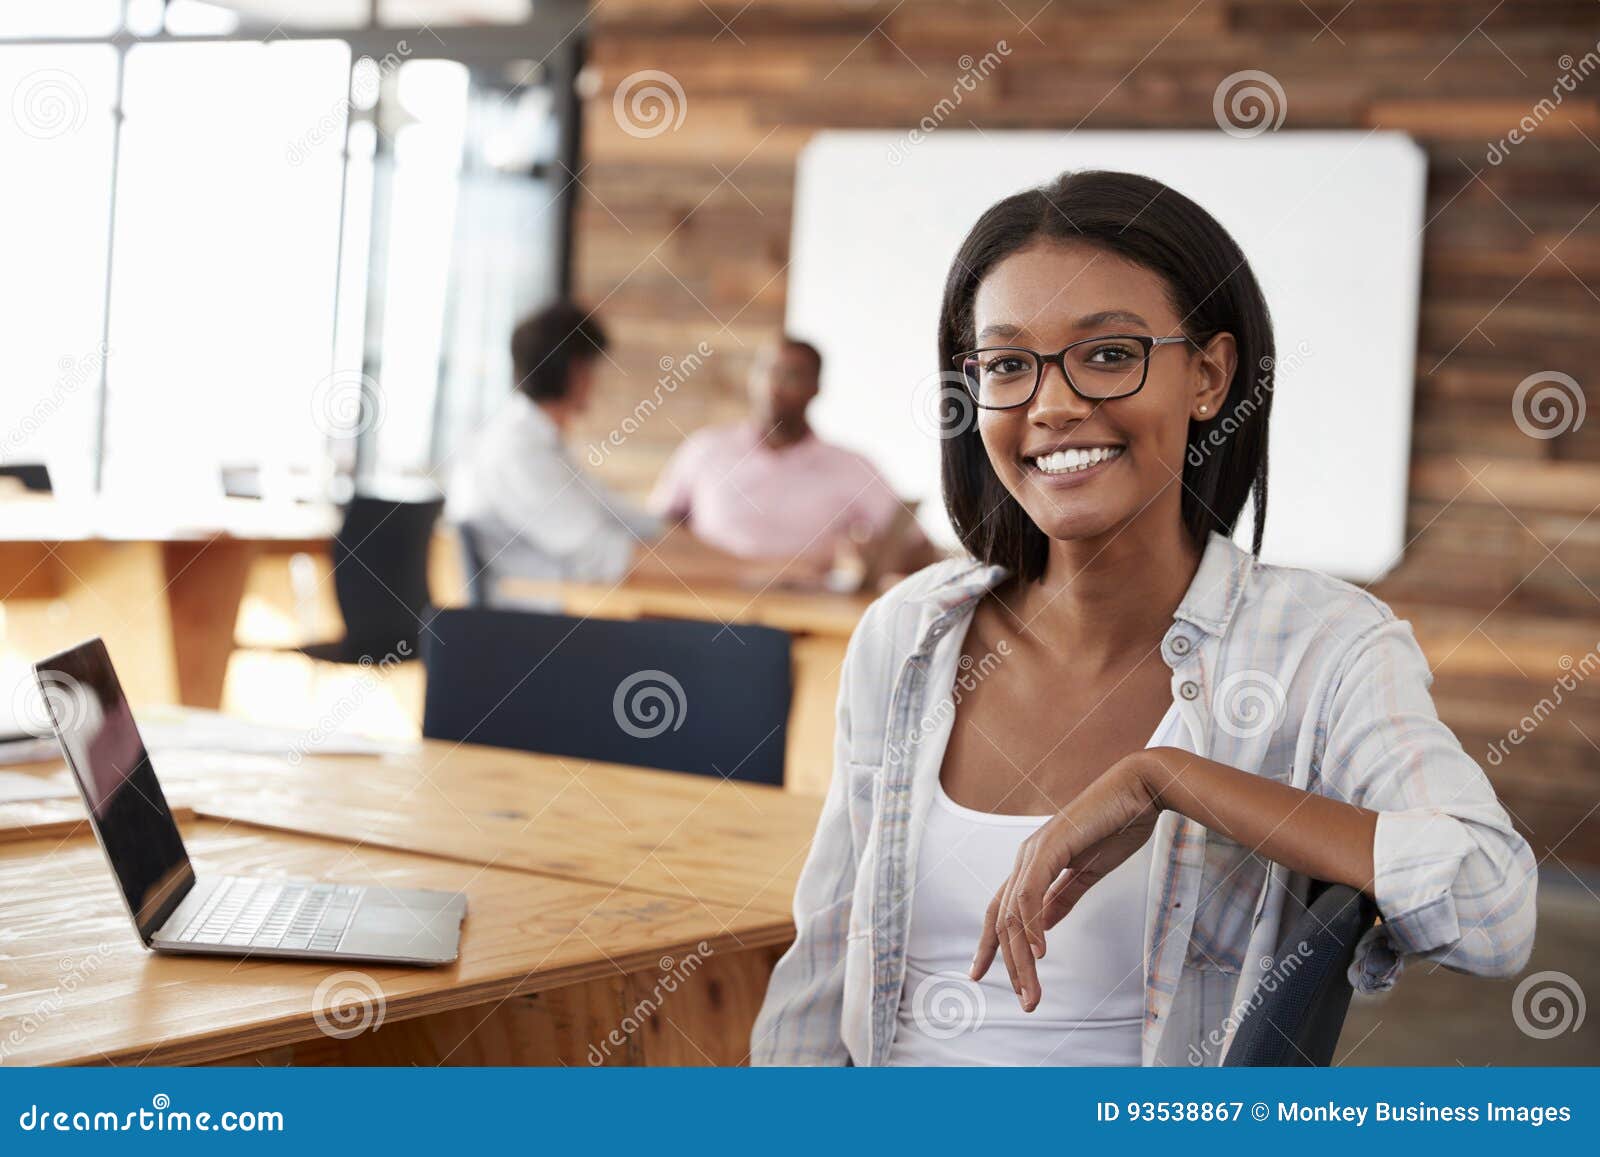 portrait of young black woman in creative office